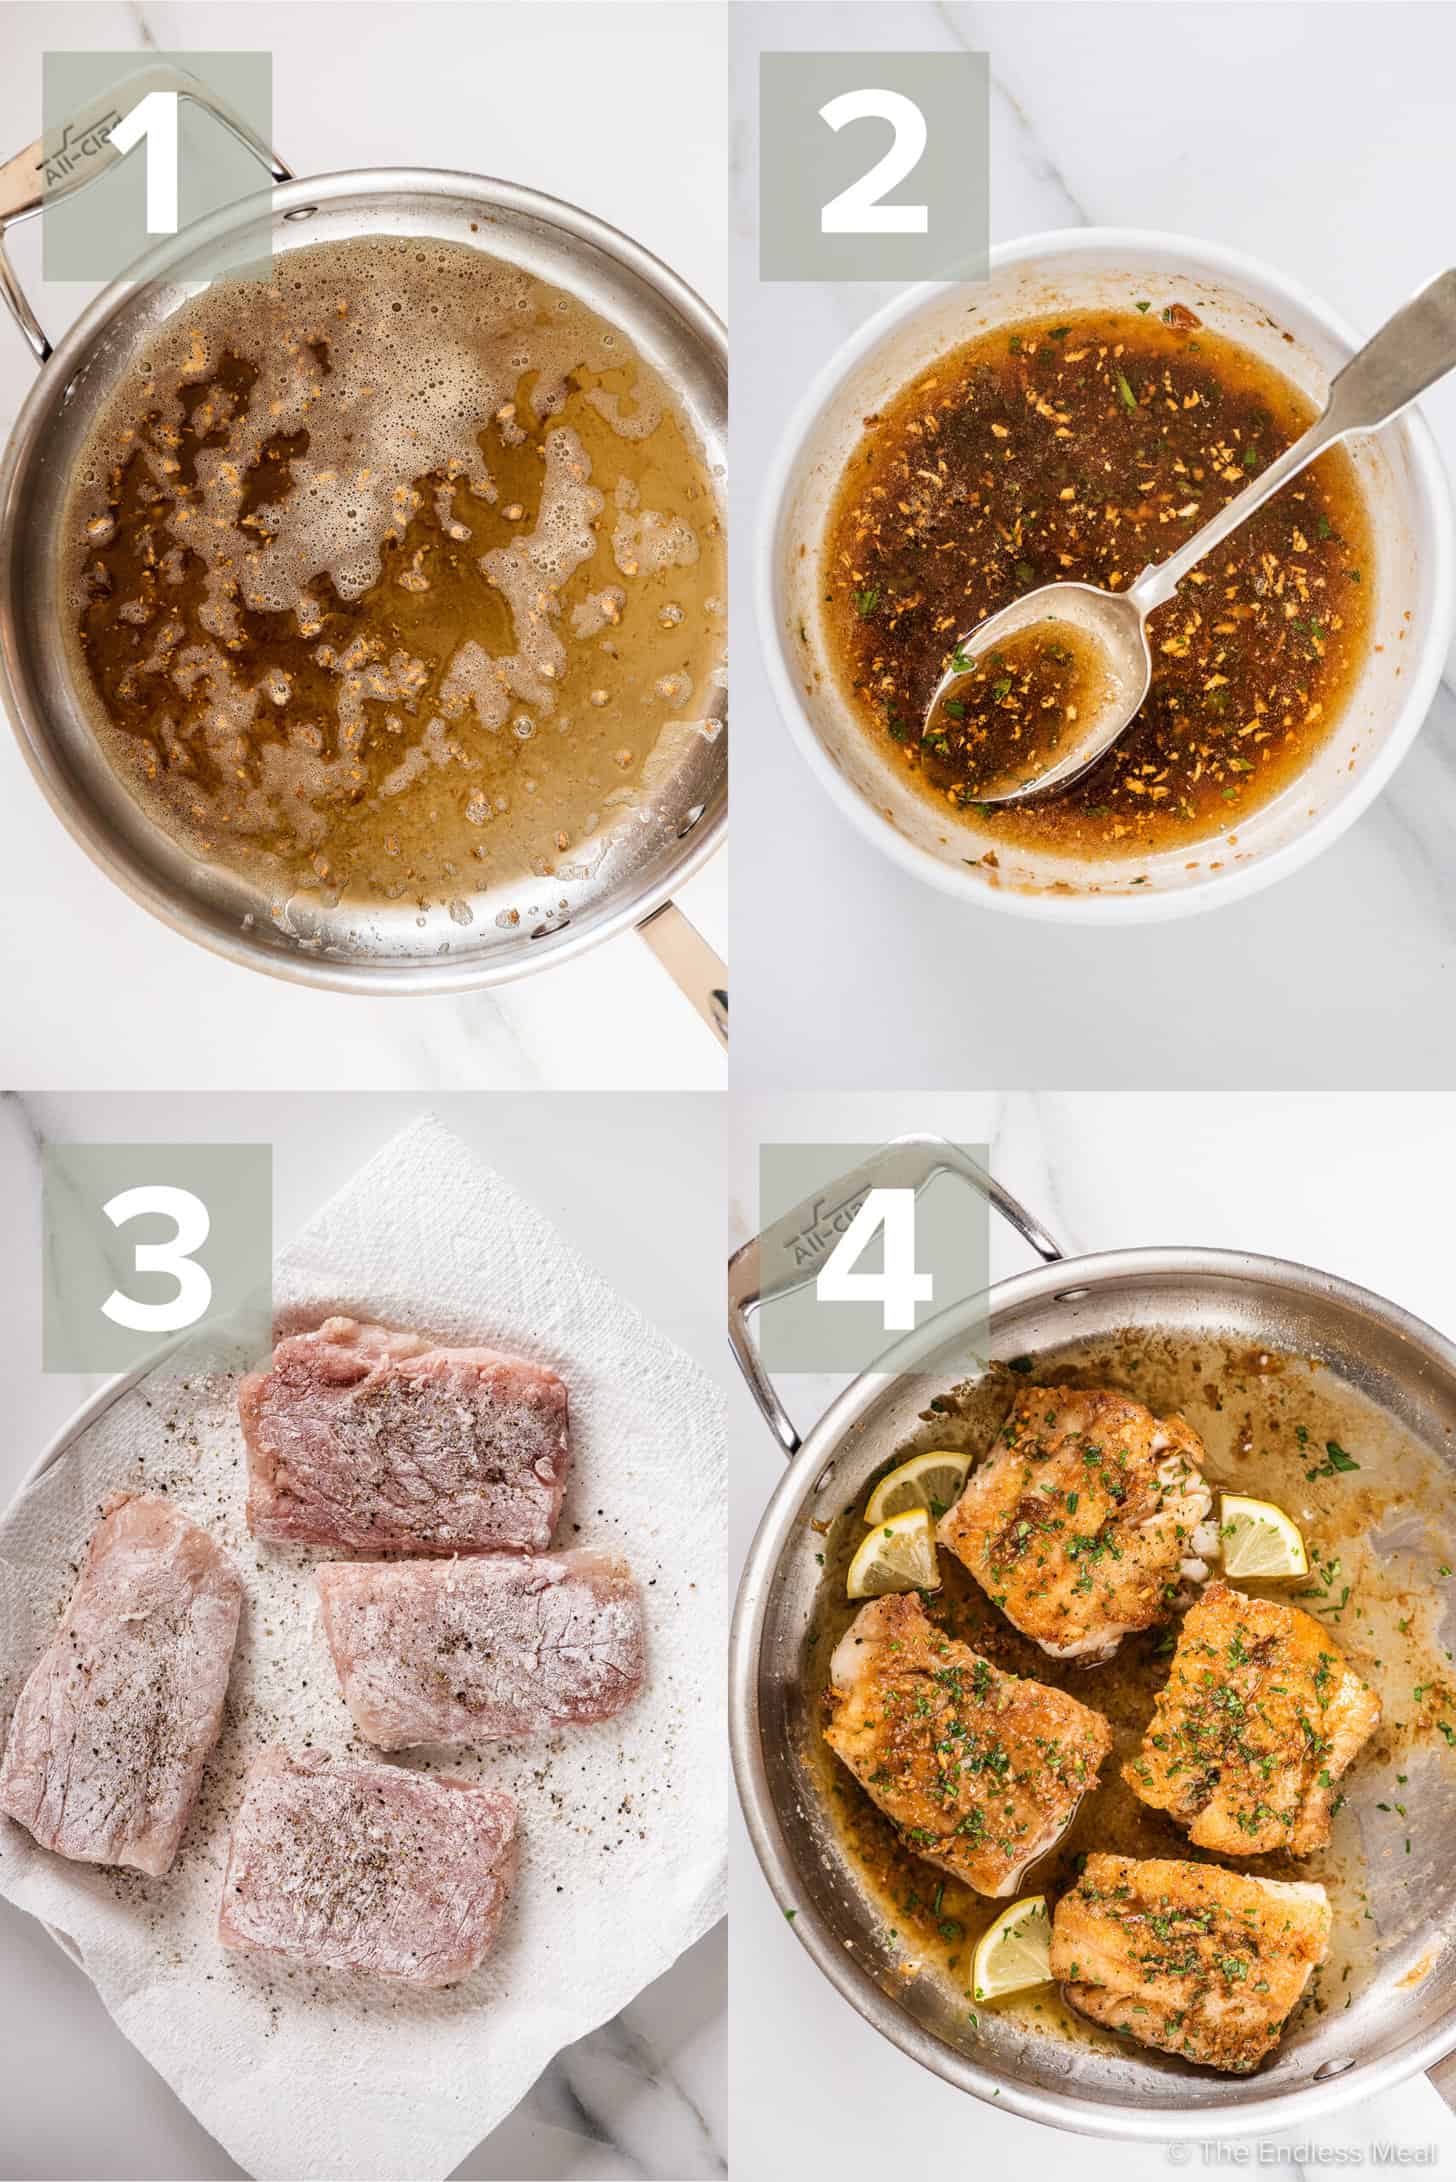 4 pictures showing how to make this seared lingcod recipe